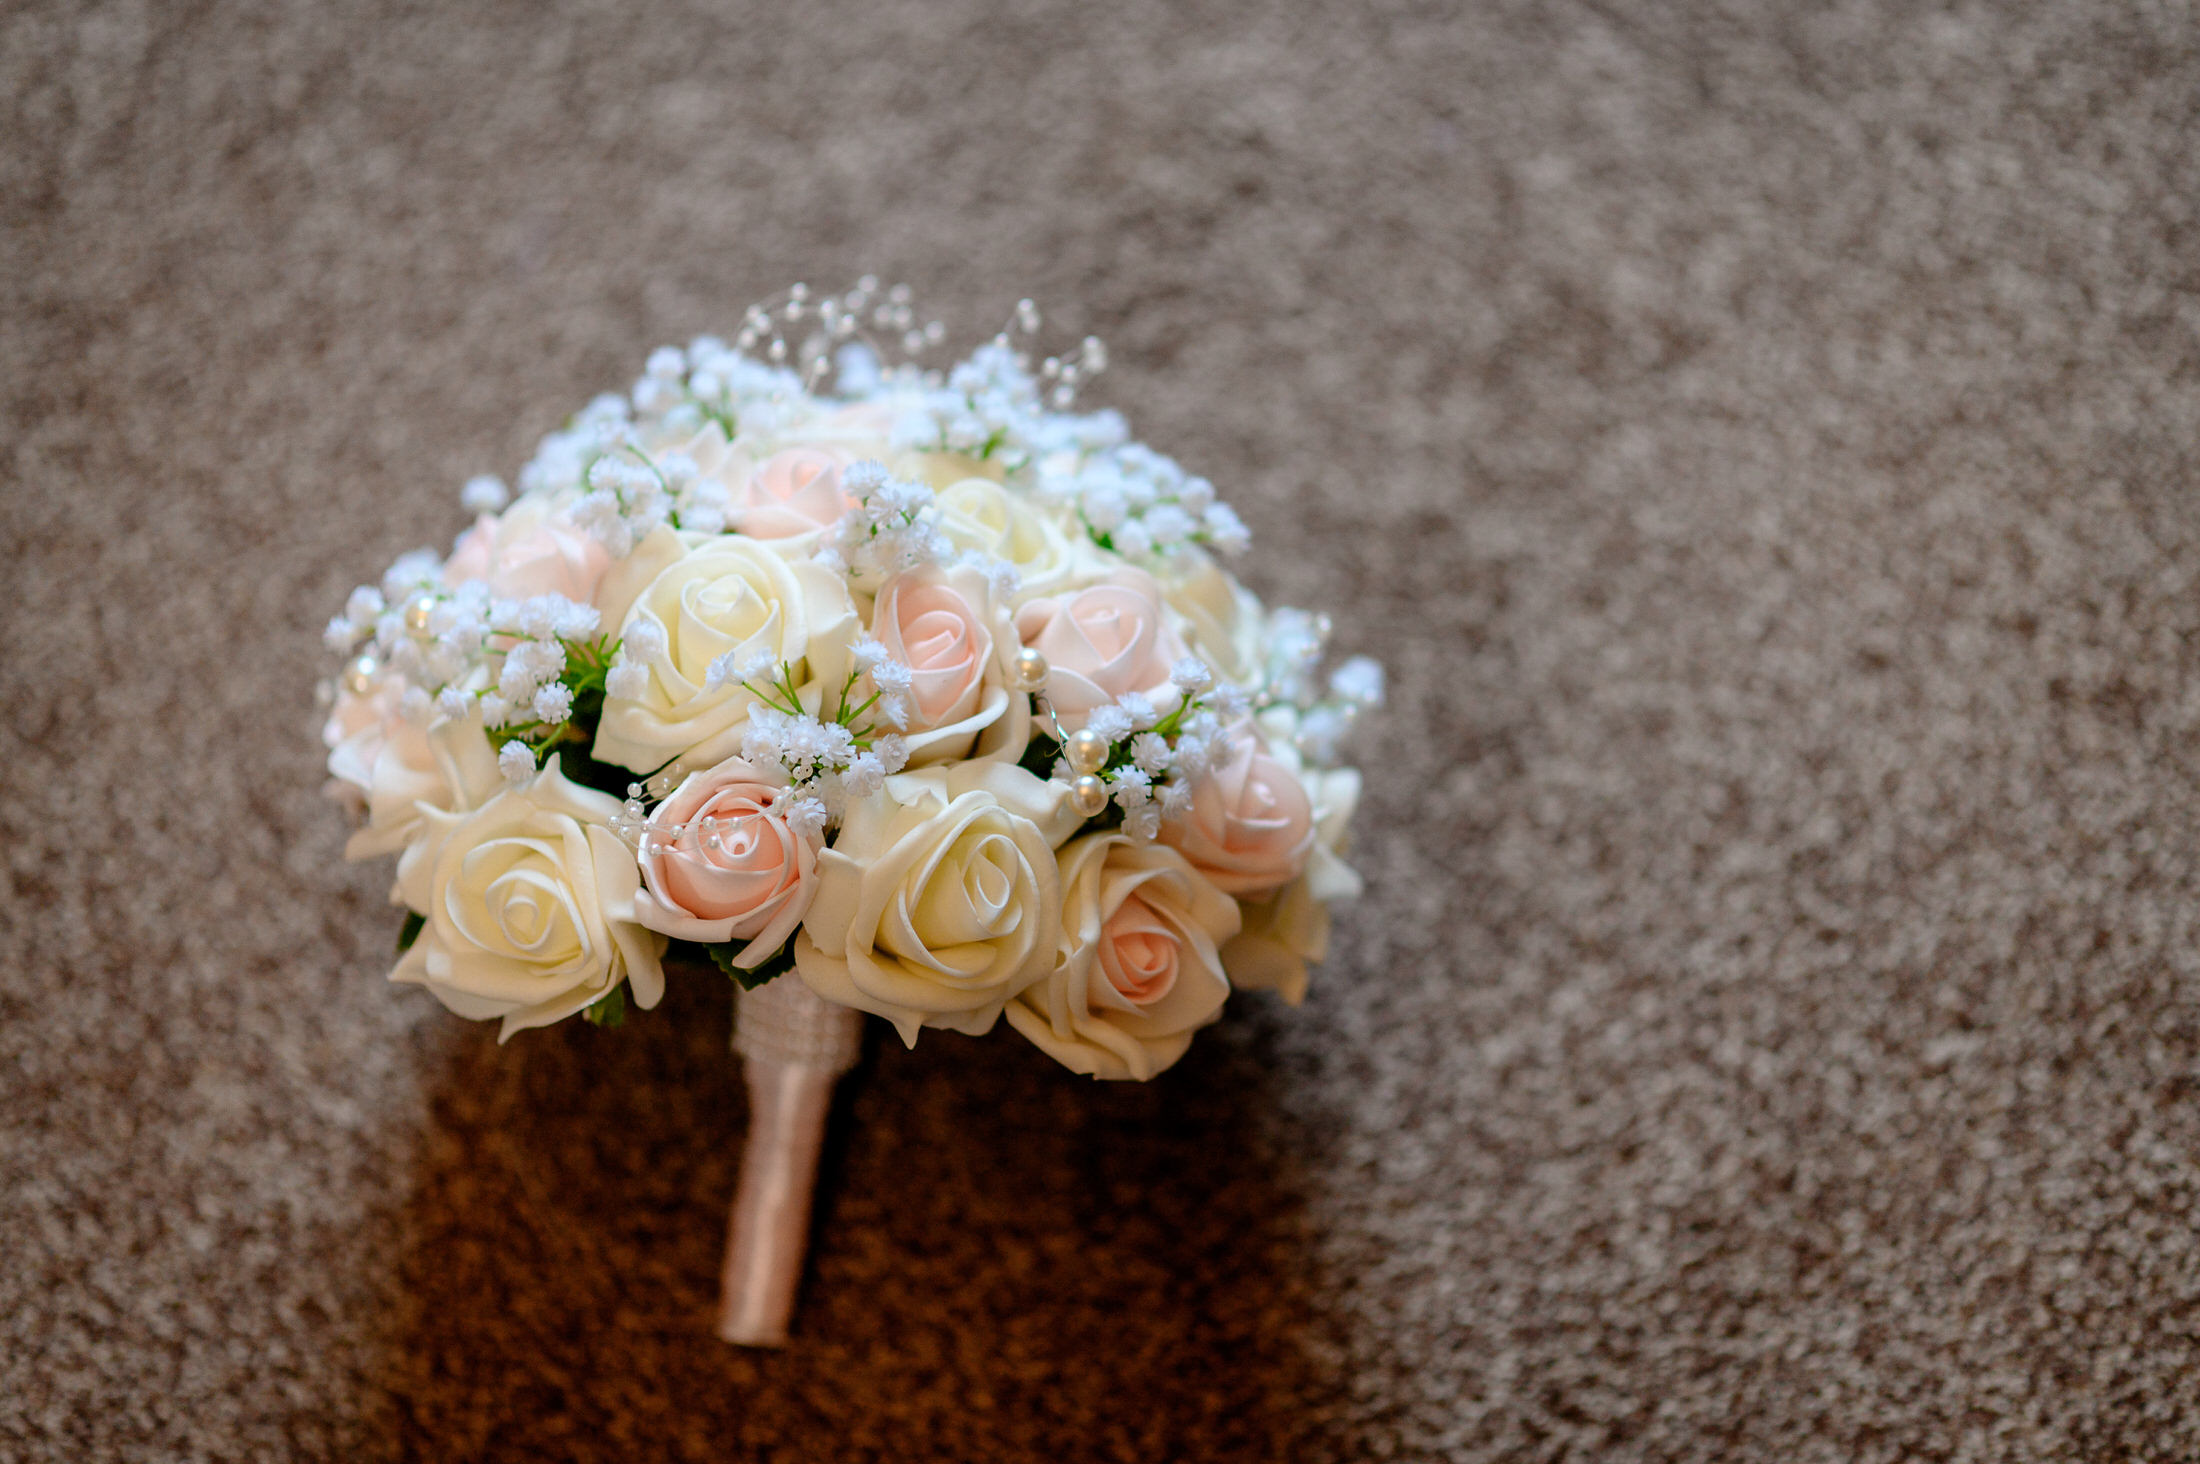 A bouquet of white and pink roses at a wedding ceremony held at Brackenborough Hotel.